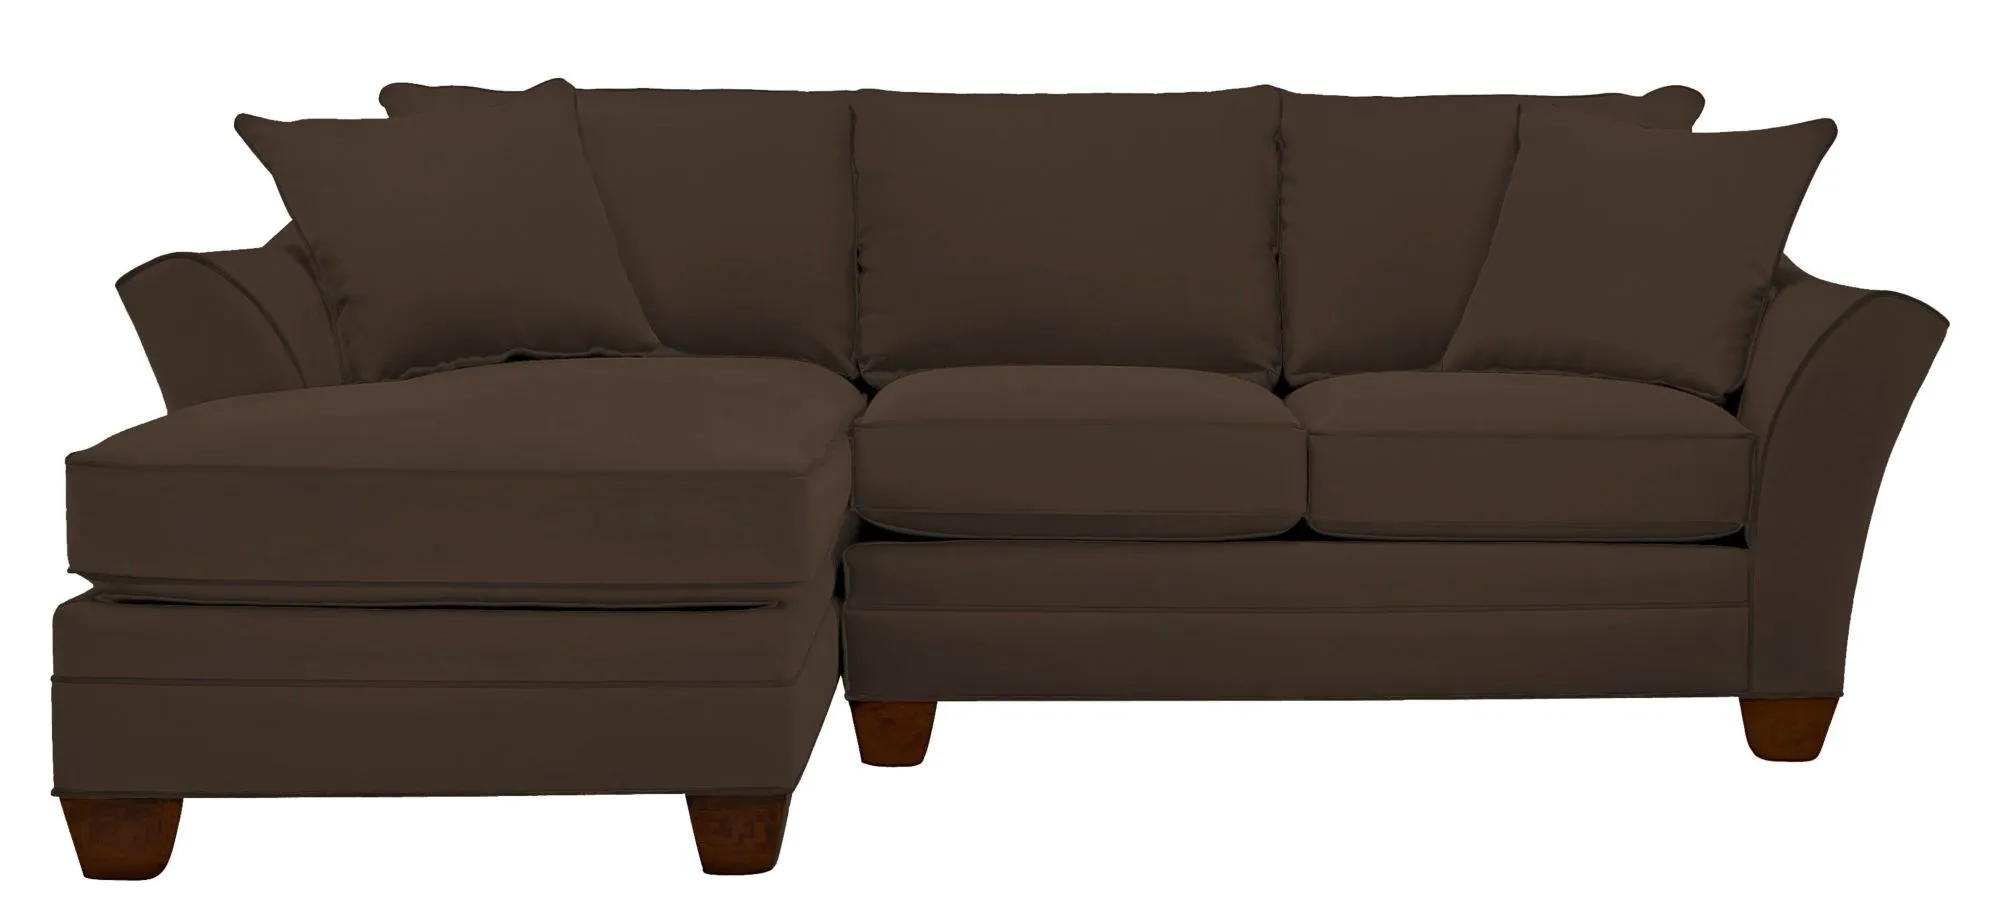 Foresthill 2-pc. Left Hand Chaise Sectional Sofa in Suede So Soft Chocolate by H.M. Richards